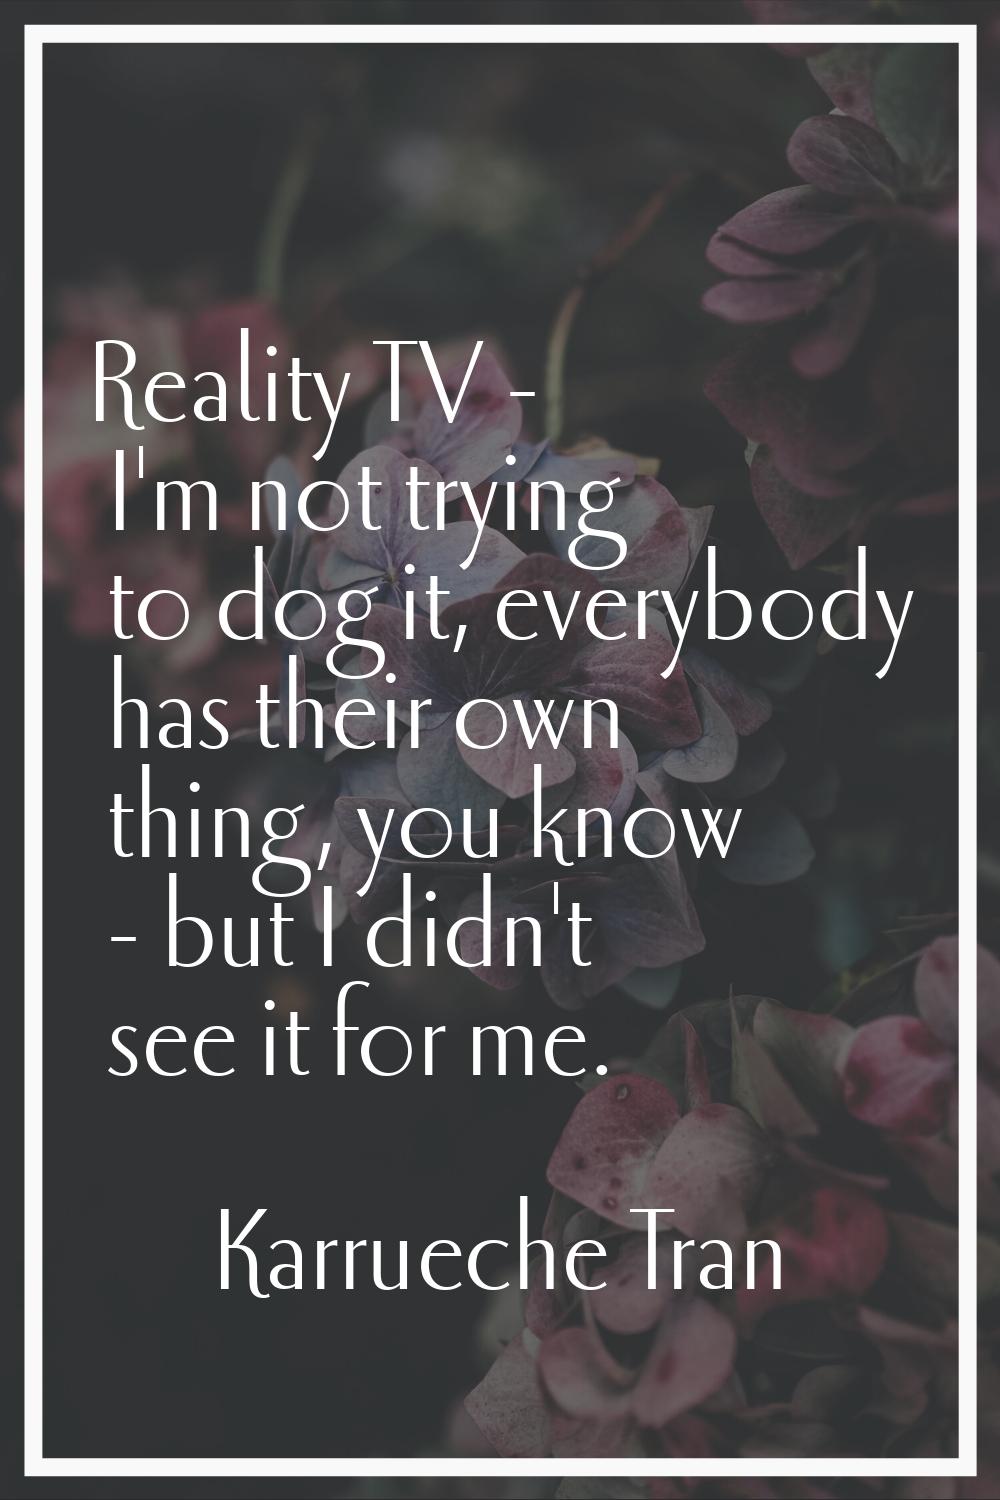 Reality TV - I'm not trying to dog it, everybody has their own thing, you know - but I didn't see i